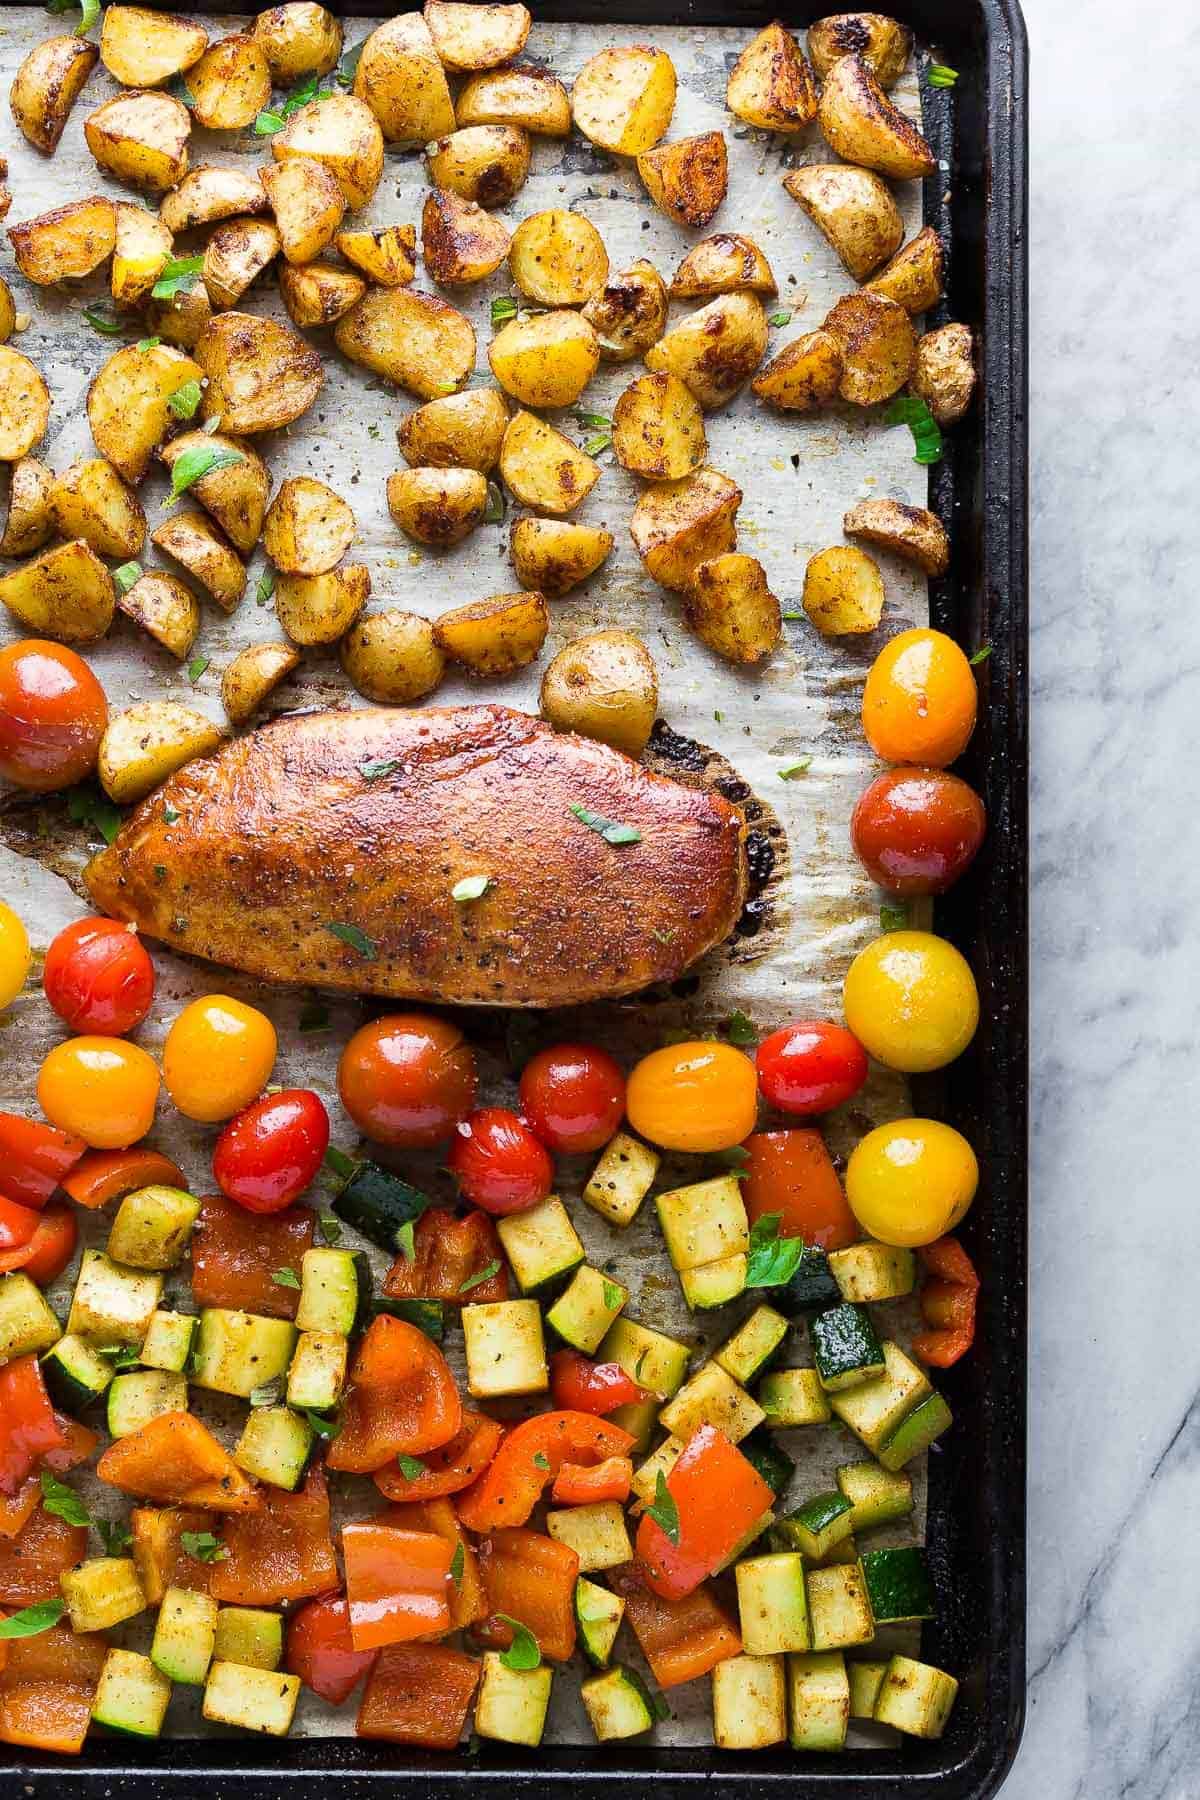 Cooked Spicy Paprika Chicken & Cherry Tomato recipe on sheet pan